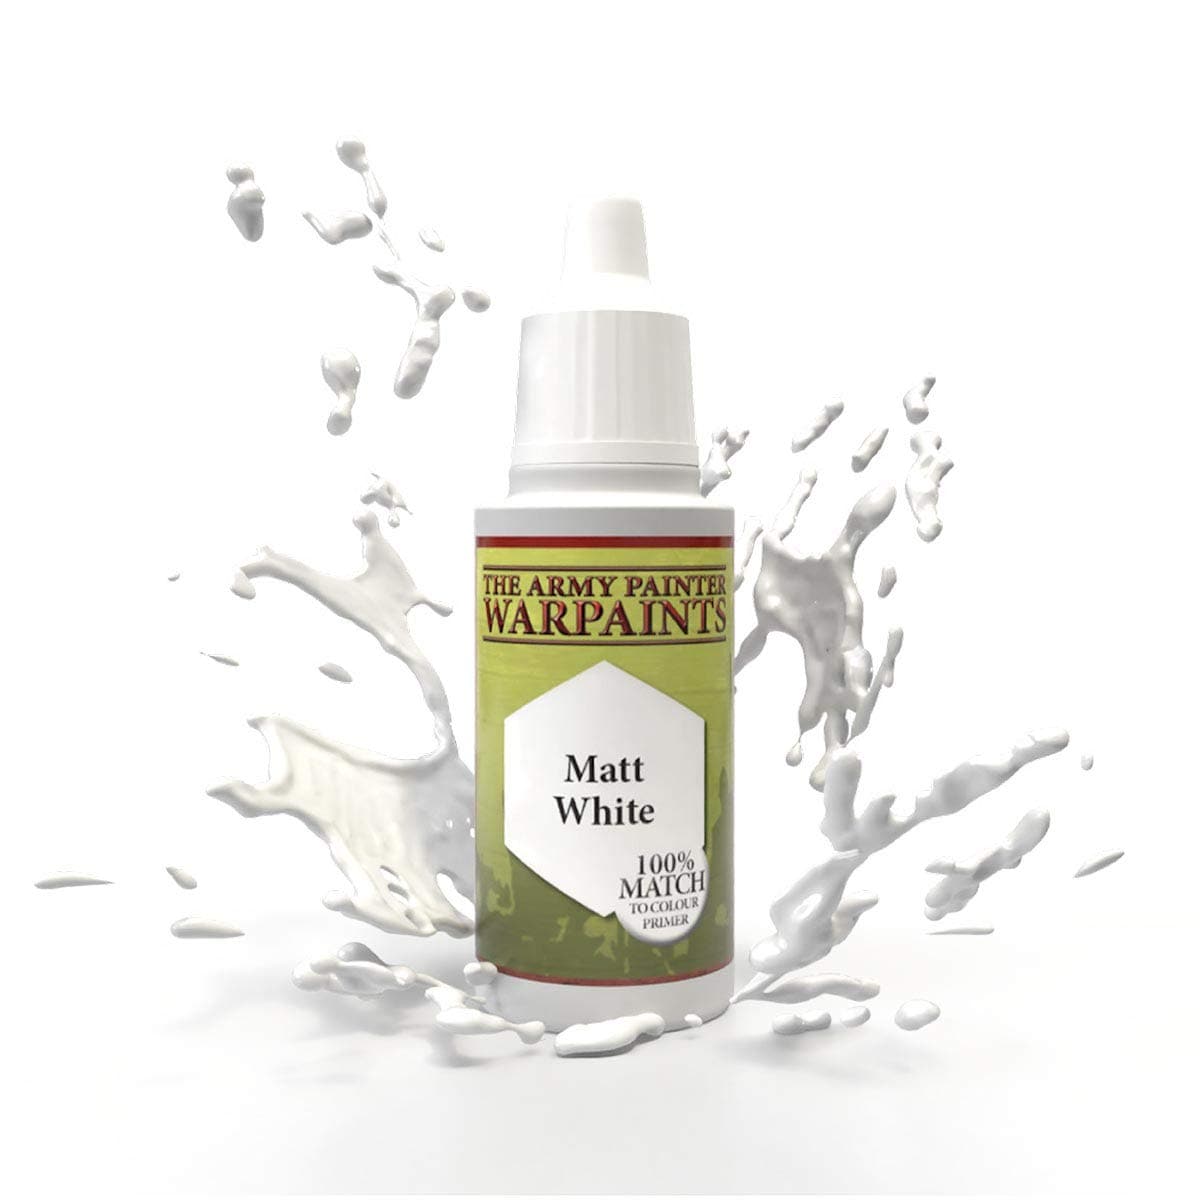 The Army Painter Accessories The Army Painter Warpaints: Matt White 18ml